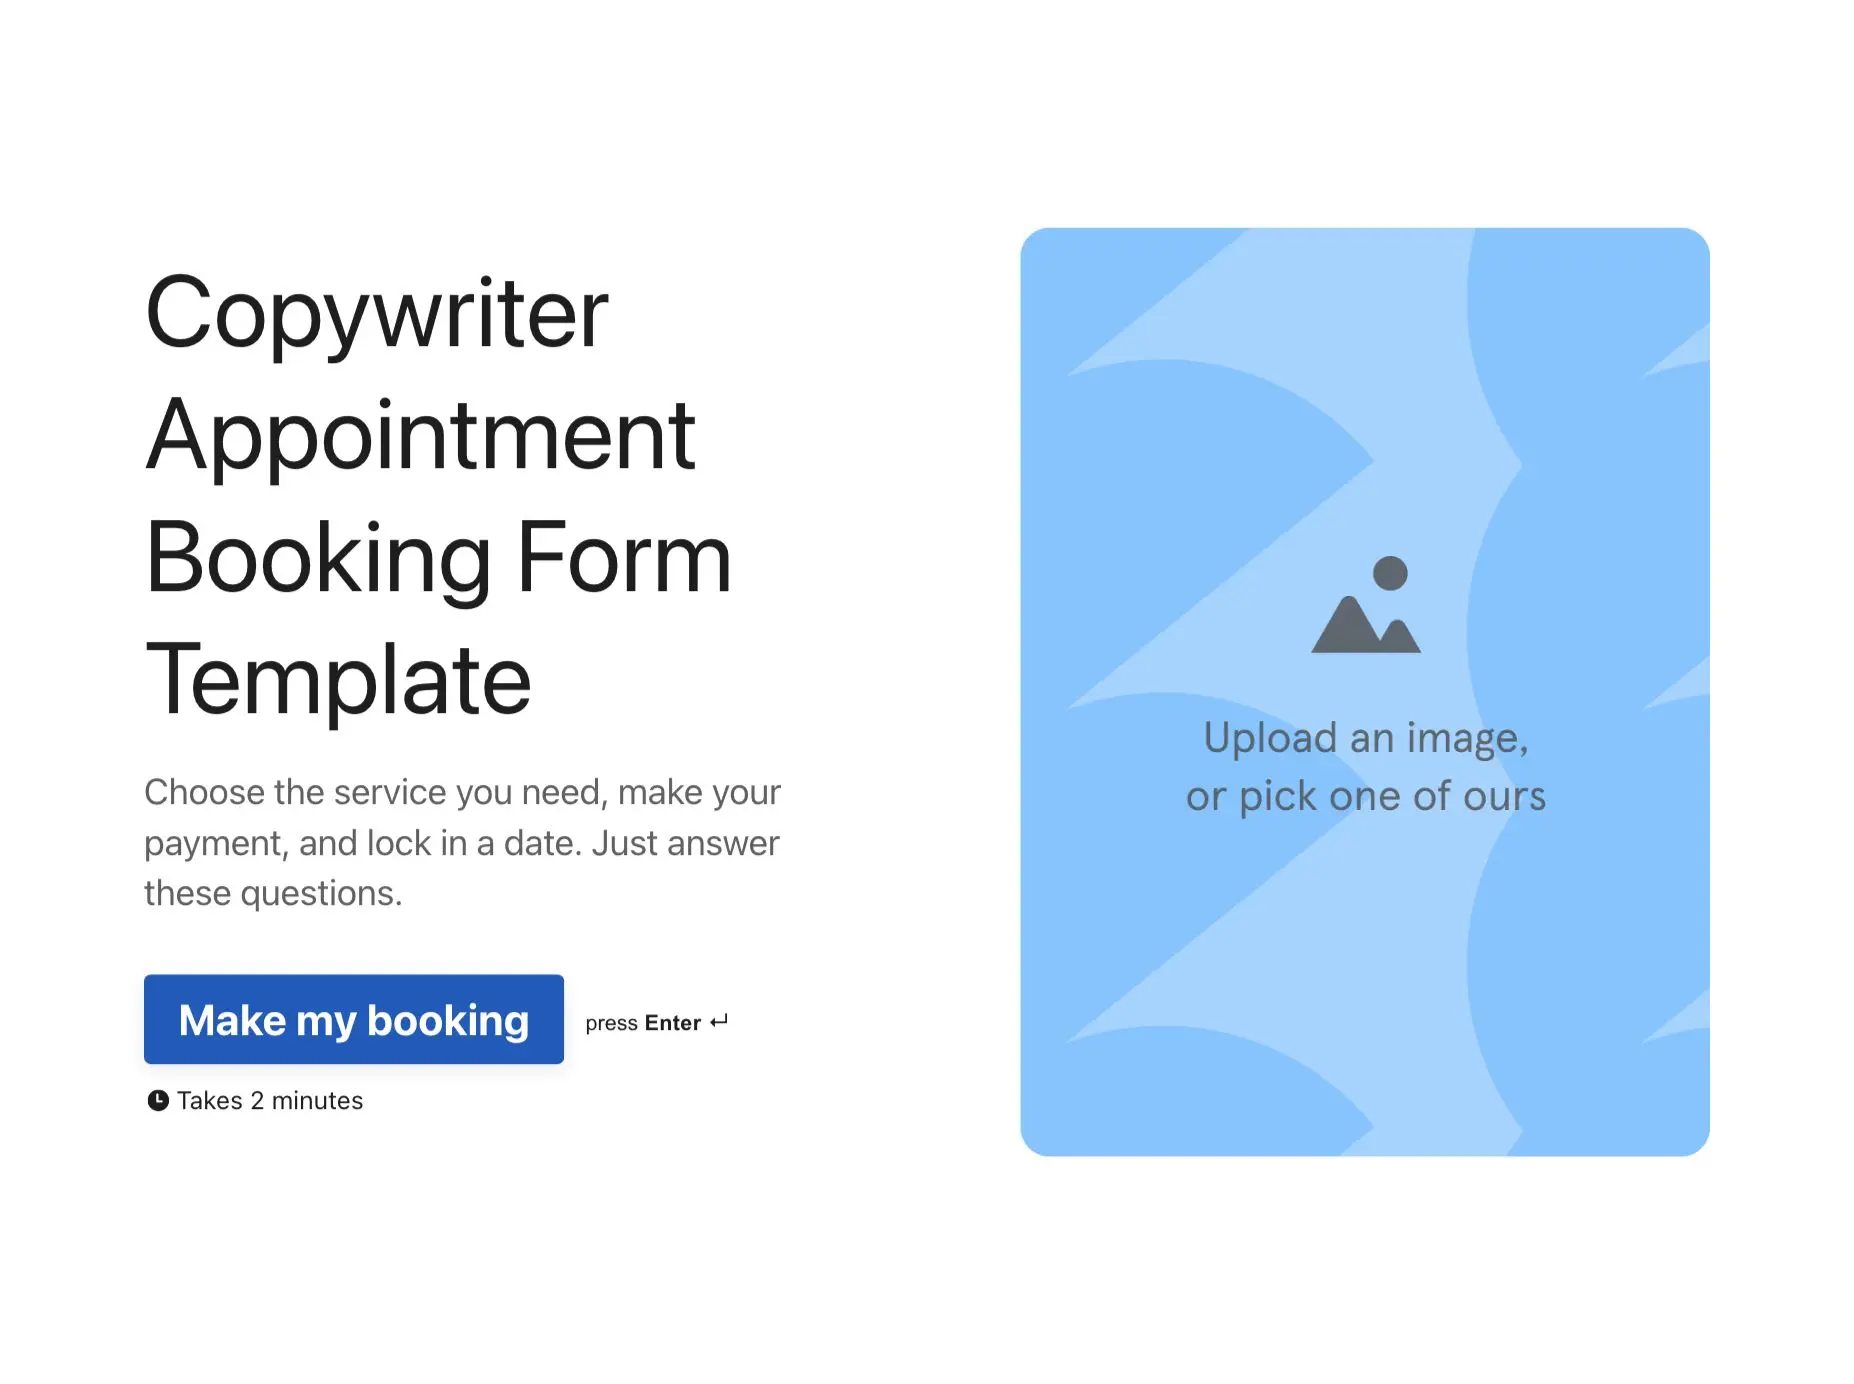 Copywriter appointment booking form template Hero